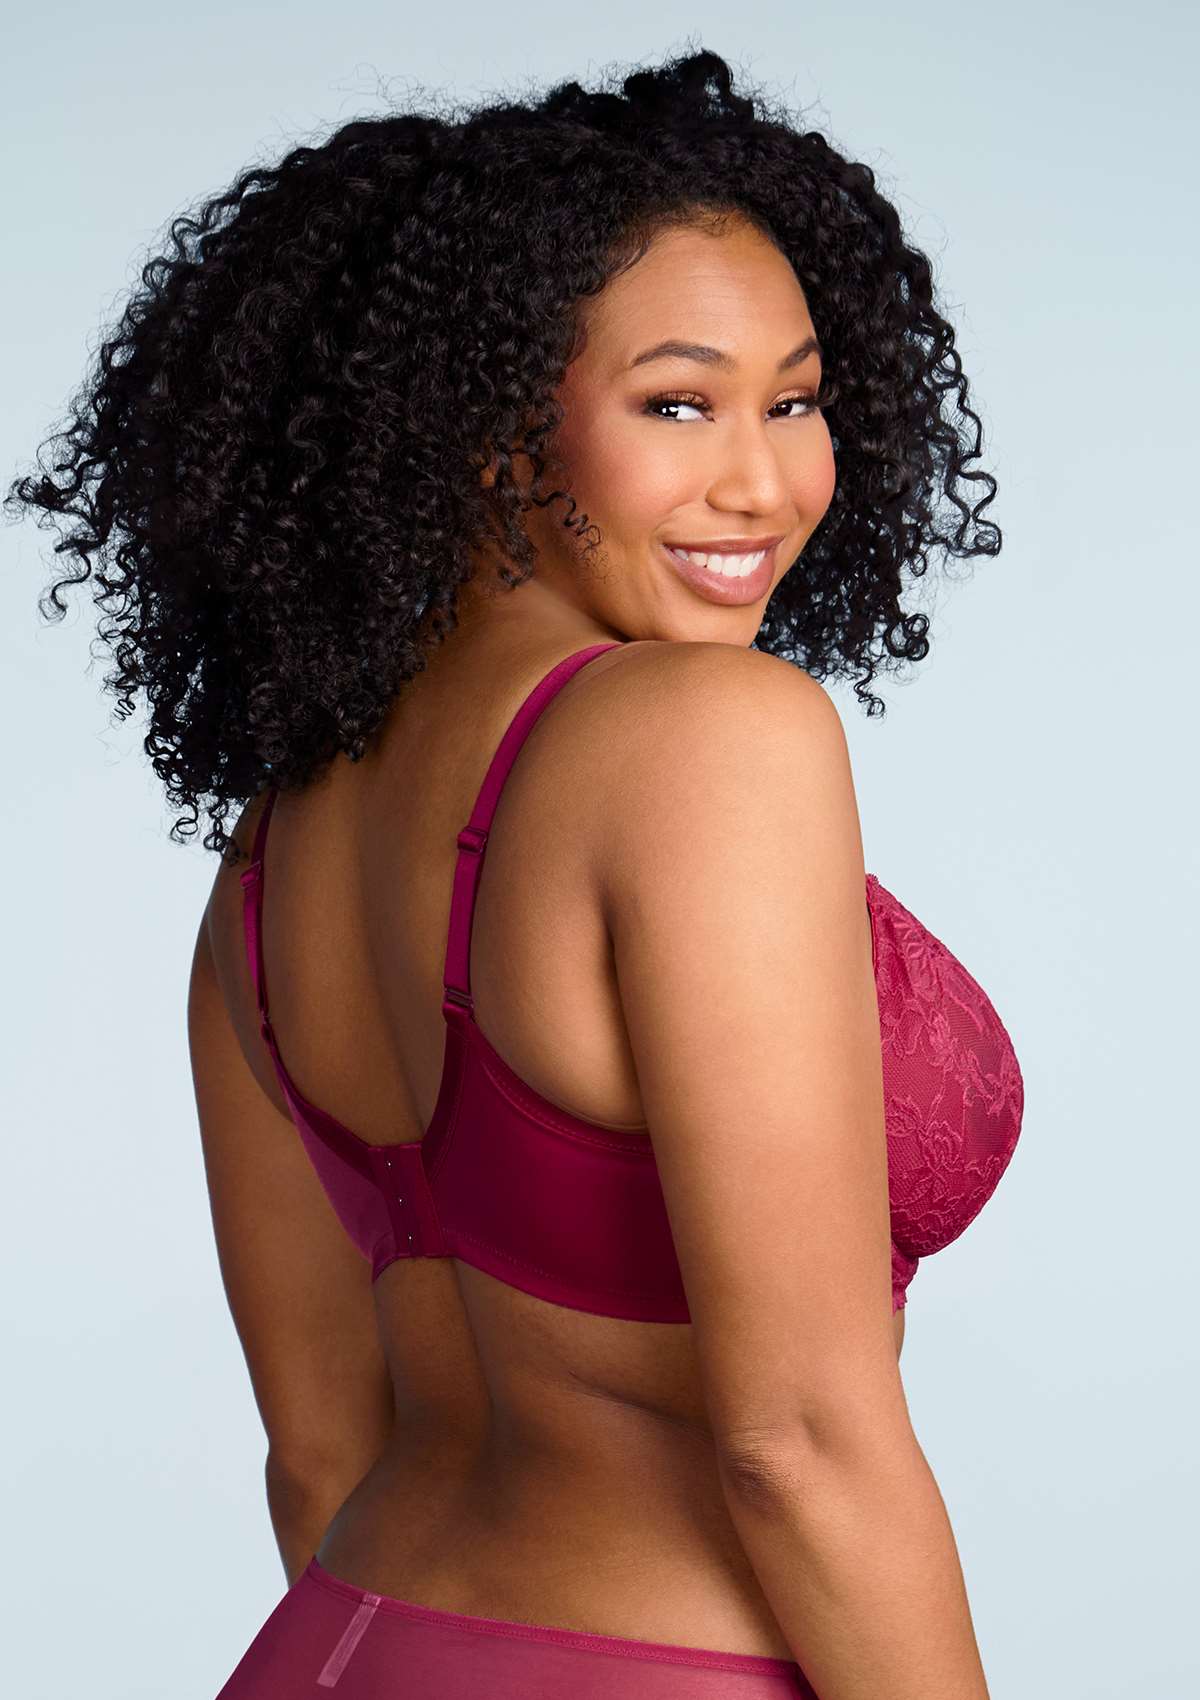 HSIA Pretty In Petals Sexy Lace Bra: Full Coverage Back Smoothing Bra - Copper Red / 36 / DDD/F